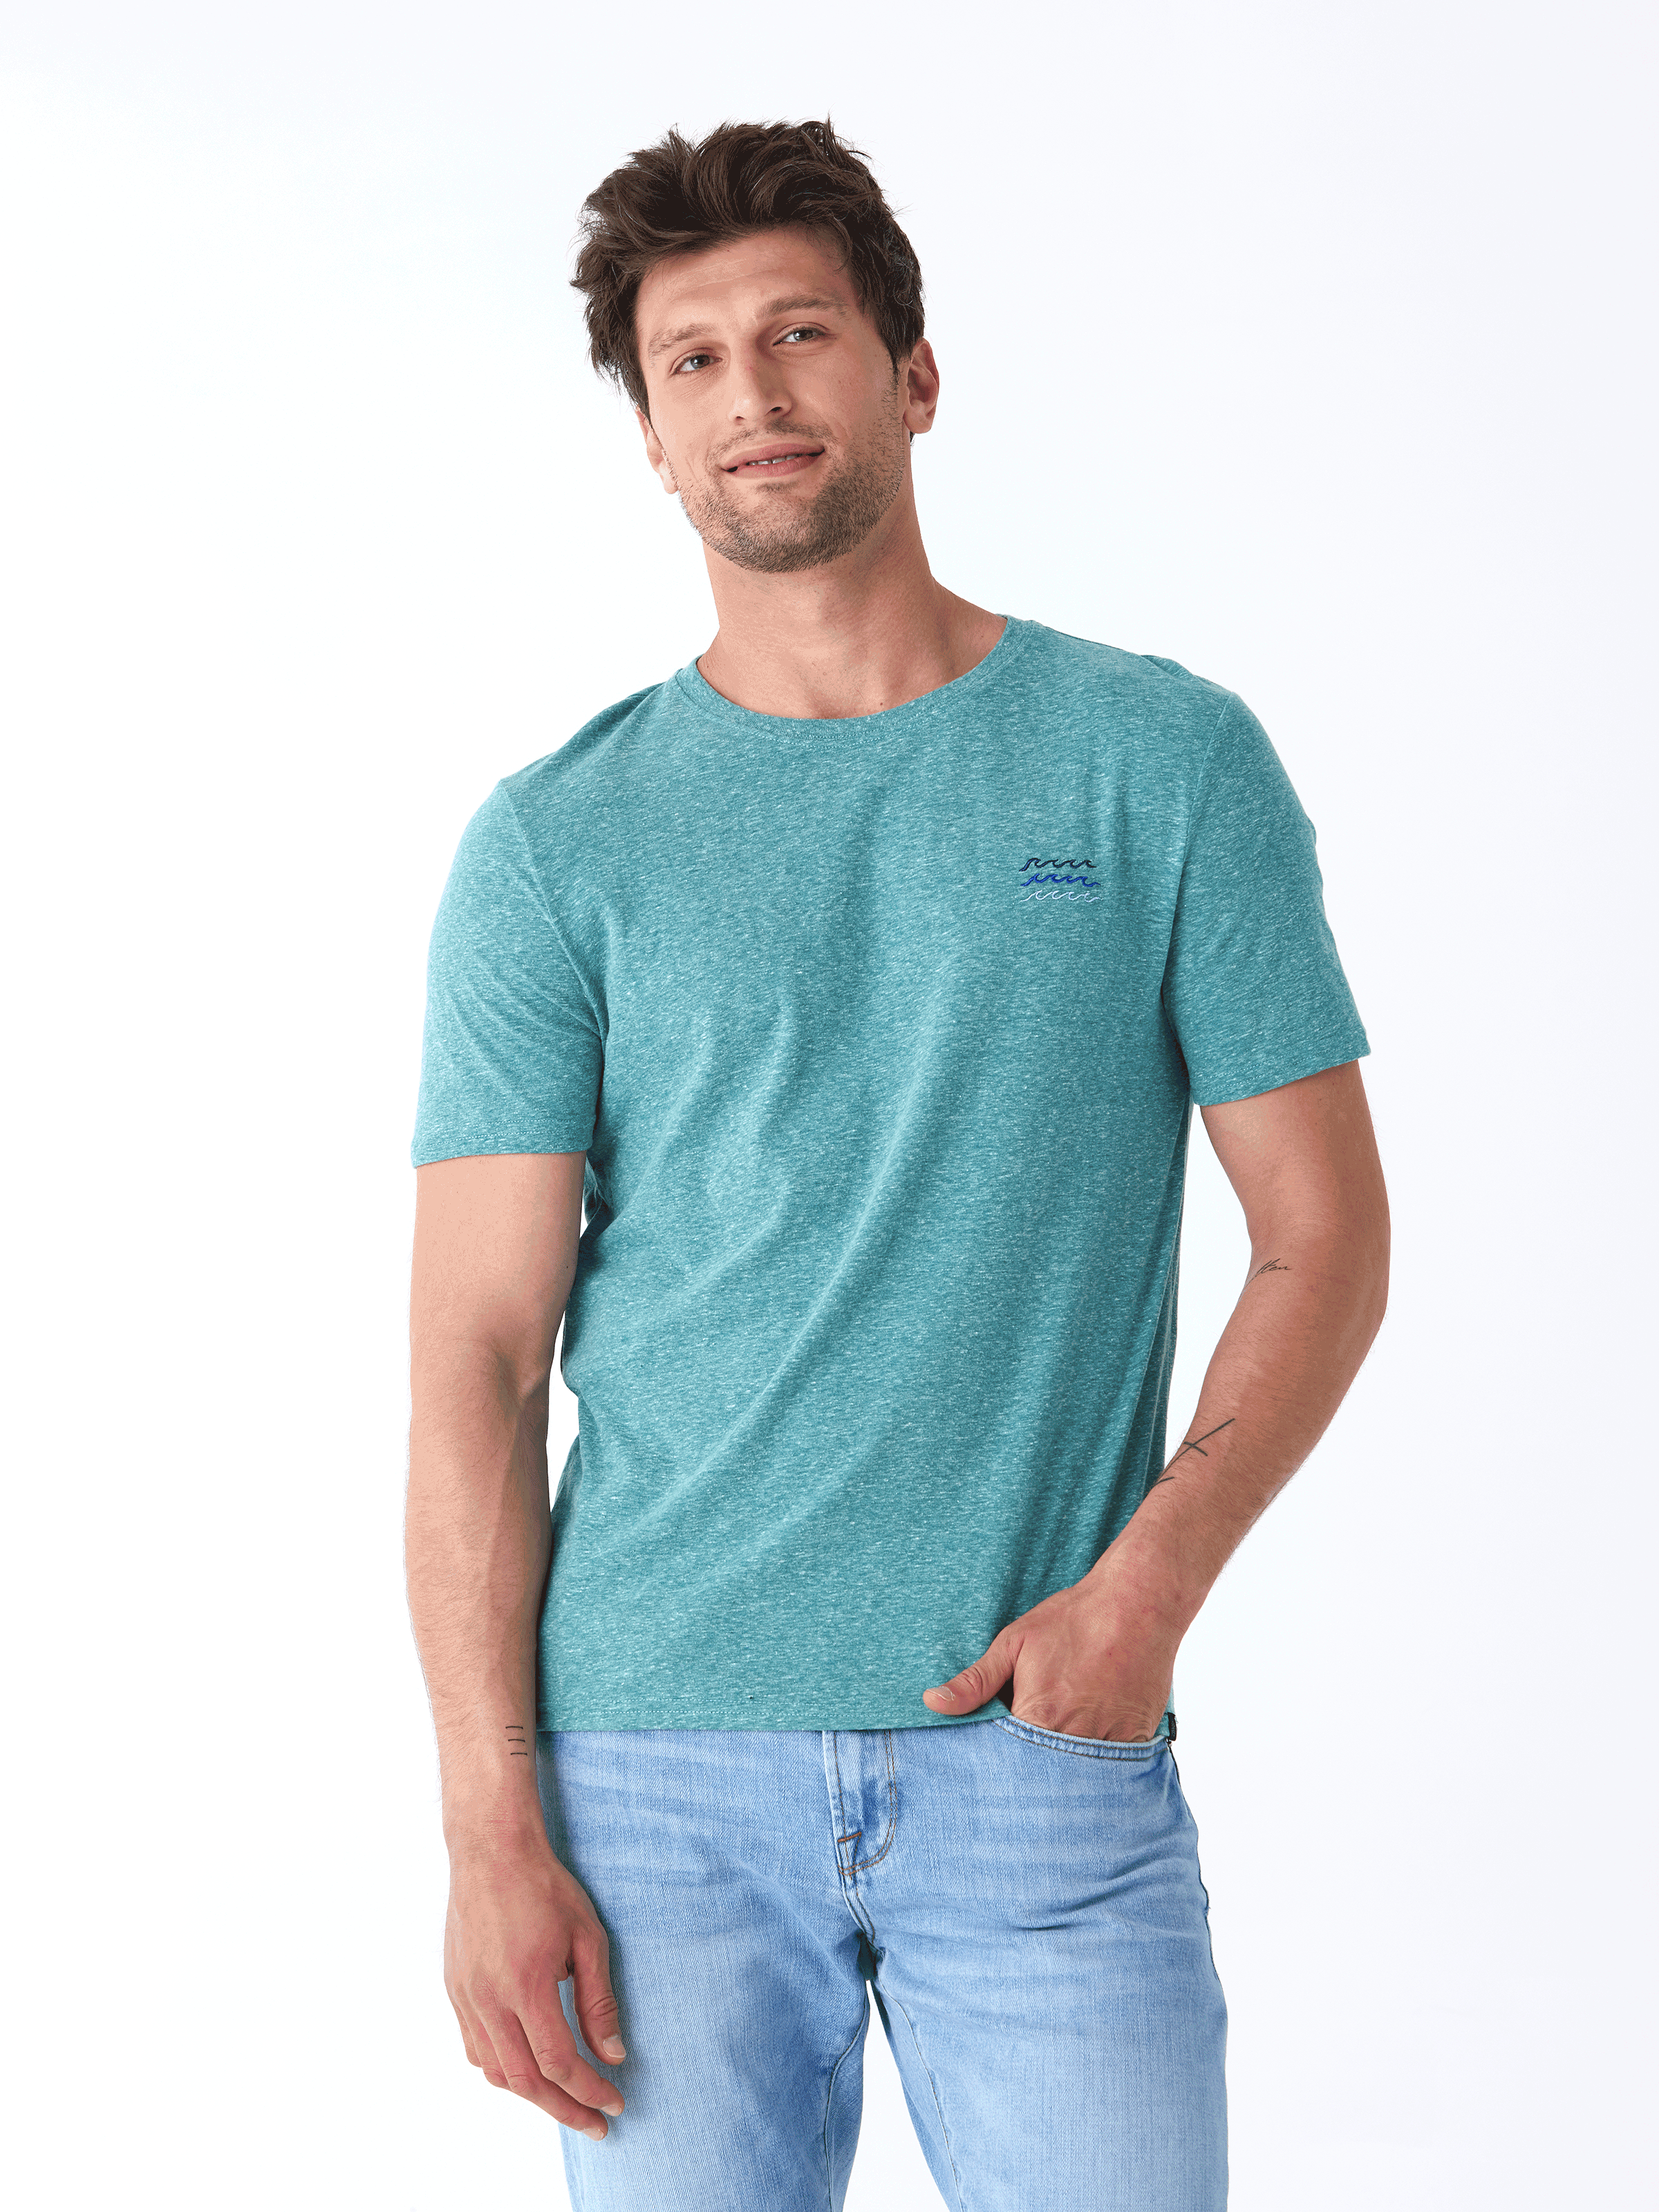 Waves Embroidered Triblend Crew Tee Mens Tops Tshirt Short Threads 4 Thought 